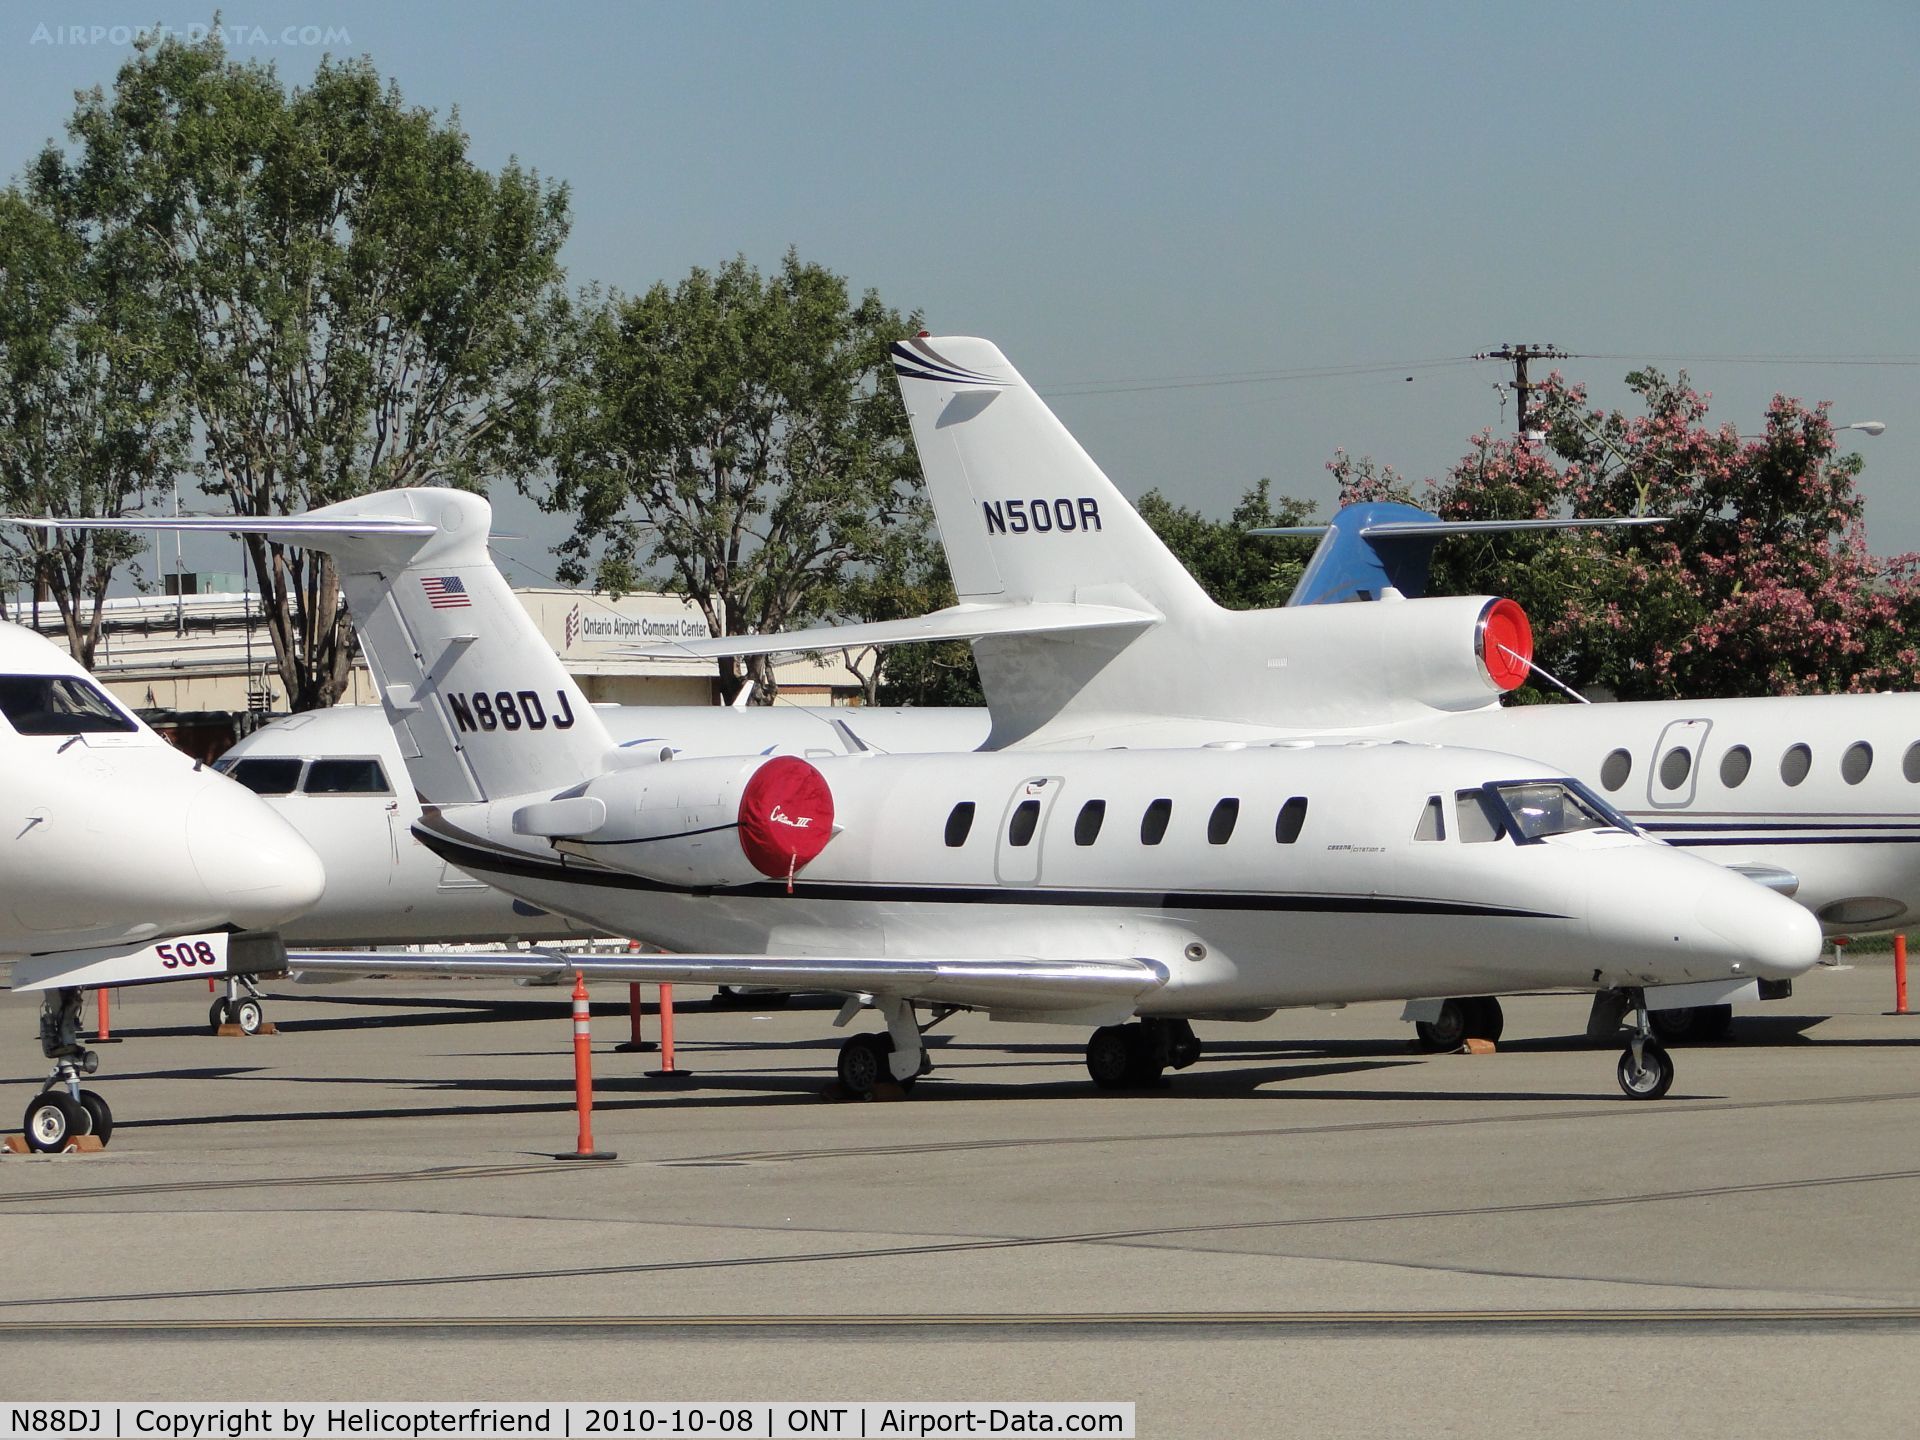 N88DJ, 1989 Cessna 650 Citation III C/N 650-0167, Parked around a lot of other jet aircraft on the southwest side